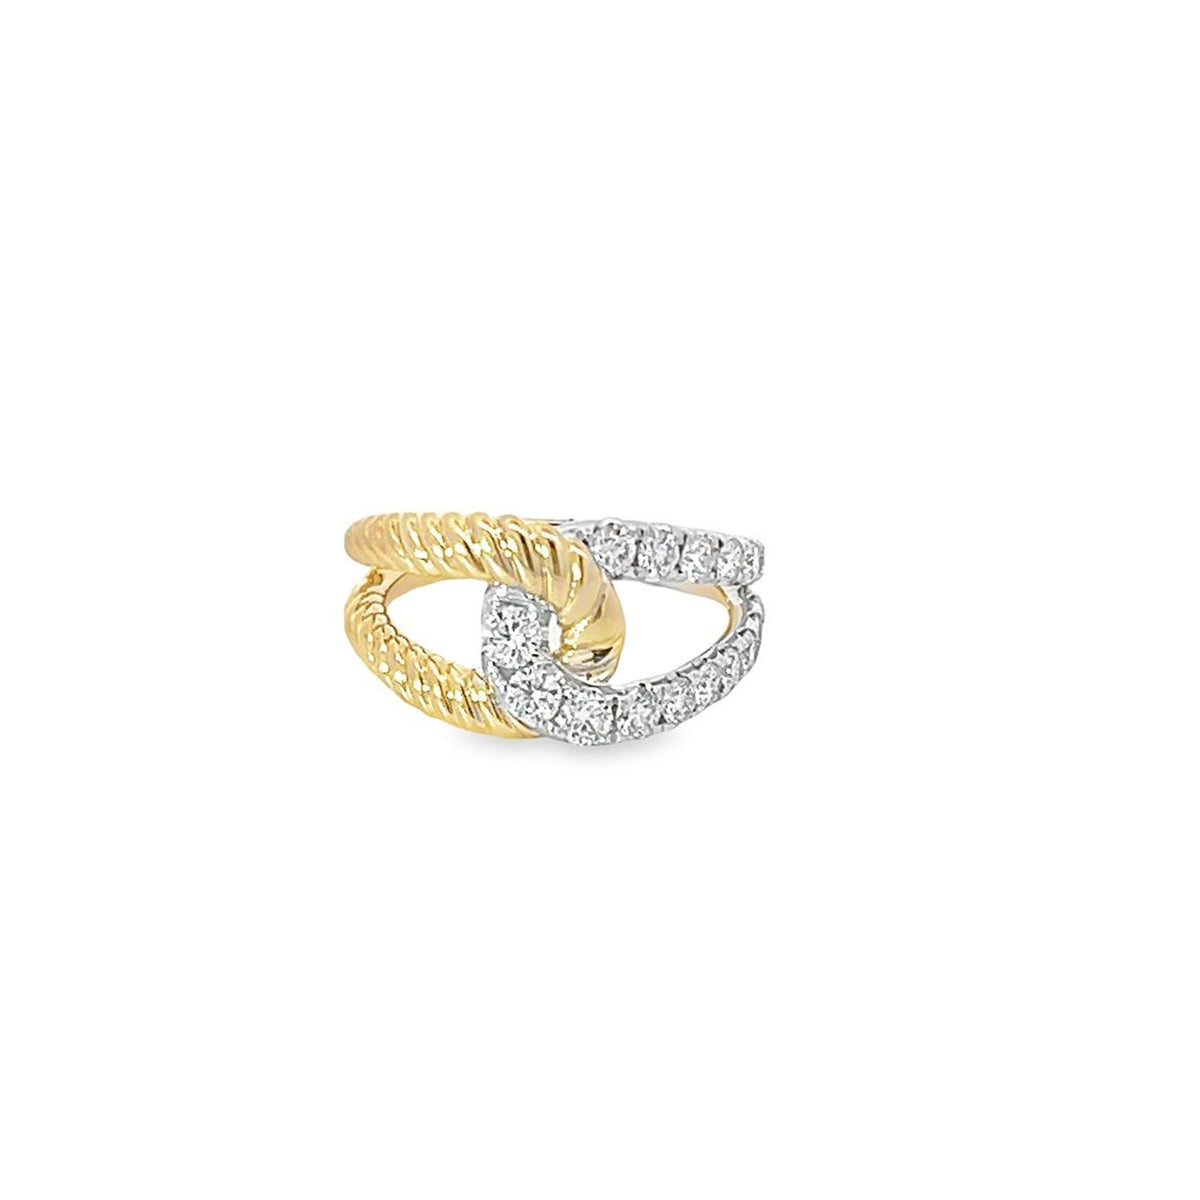 14Kt Yellow & White Gold Interlocking Ring With 0.96cttw Natural Diamonds